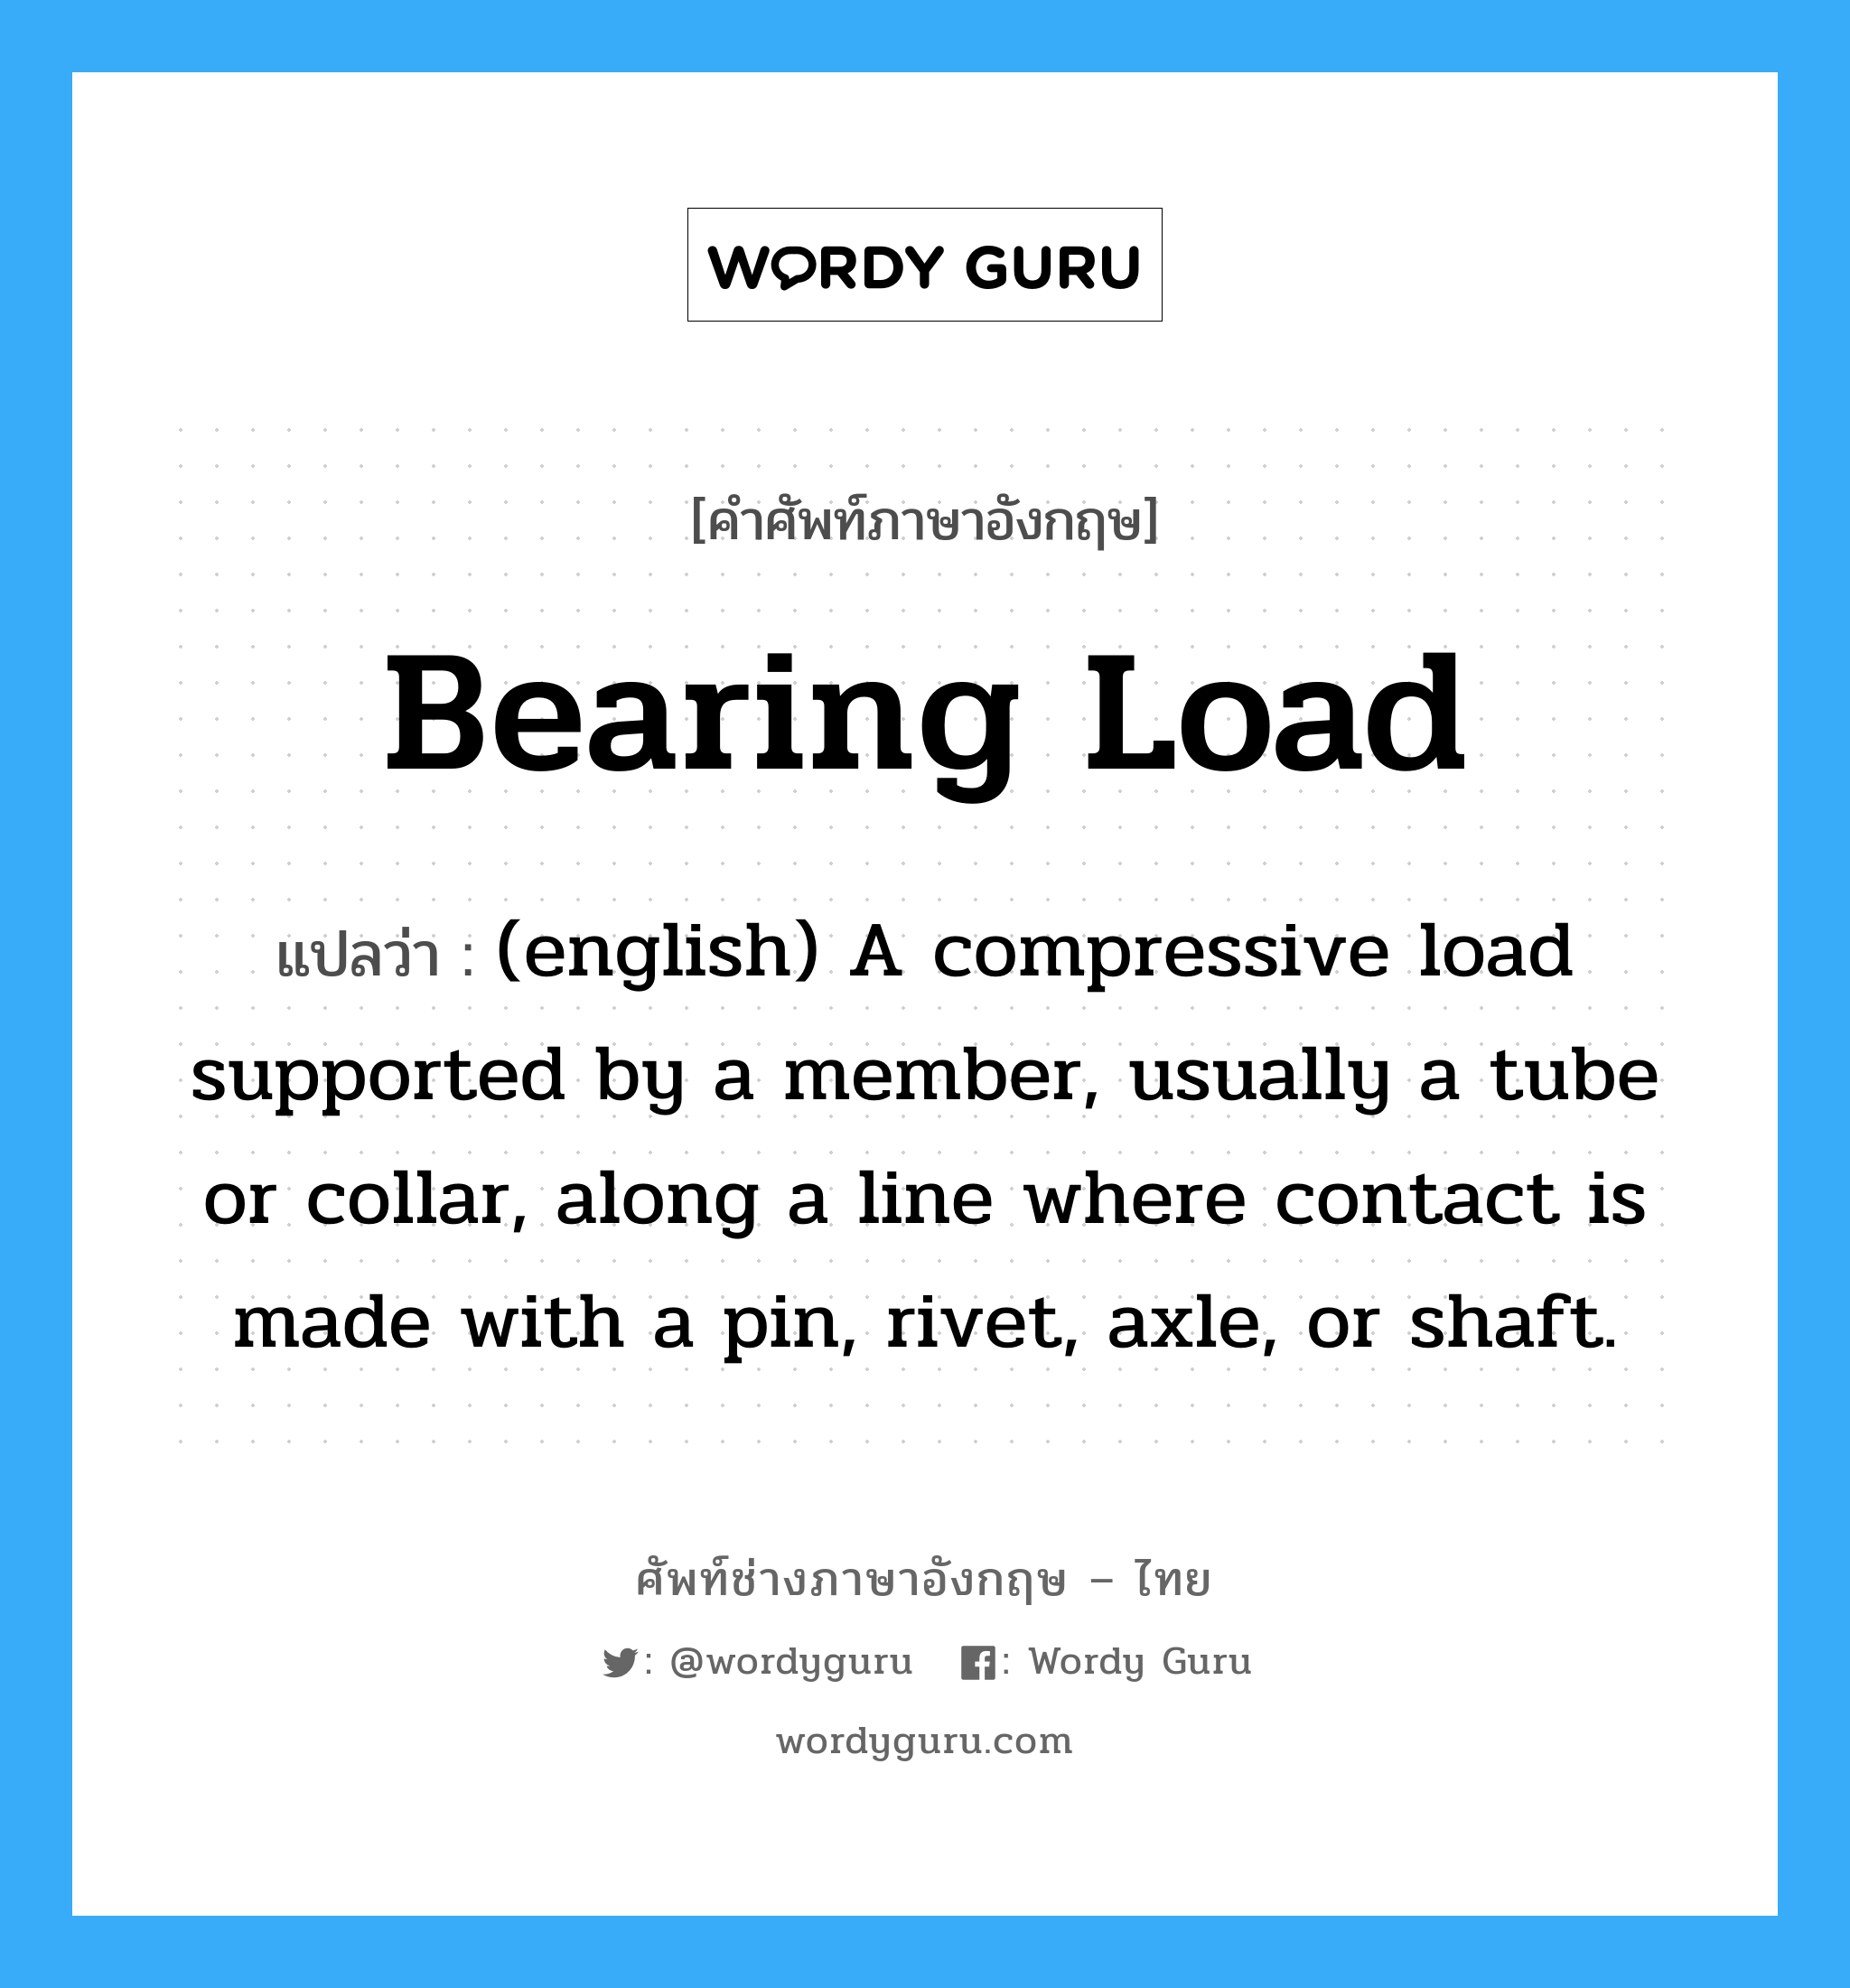 Bearing Load แปลว่า?, คำศัพท์ช่างภาษาอังกฤษ - ไทย Bearing Load คำศัพท์ภาษาอังกฤษ Bearing Load แปลว่า (english) A compressive load supported by a member, usually a tube or collar, along a line where contact is made with a pin, rivet, axle, or shaft.